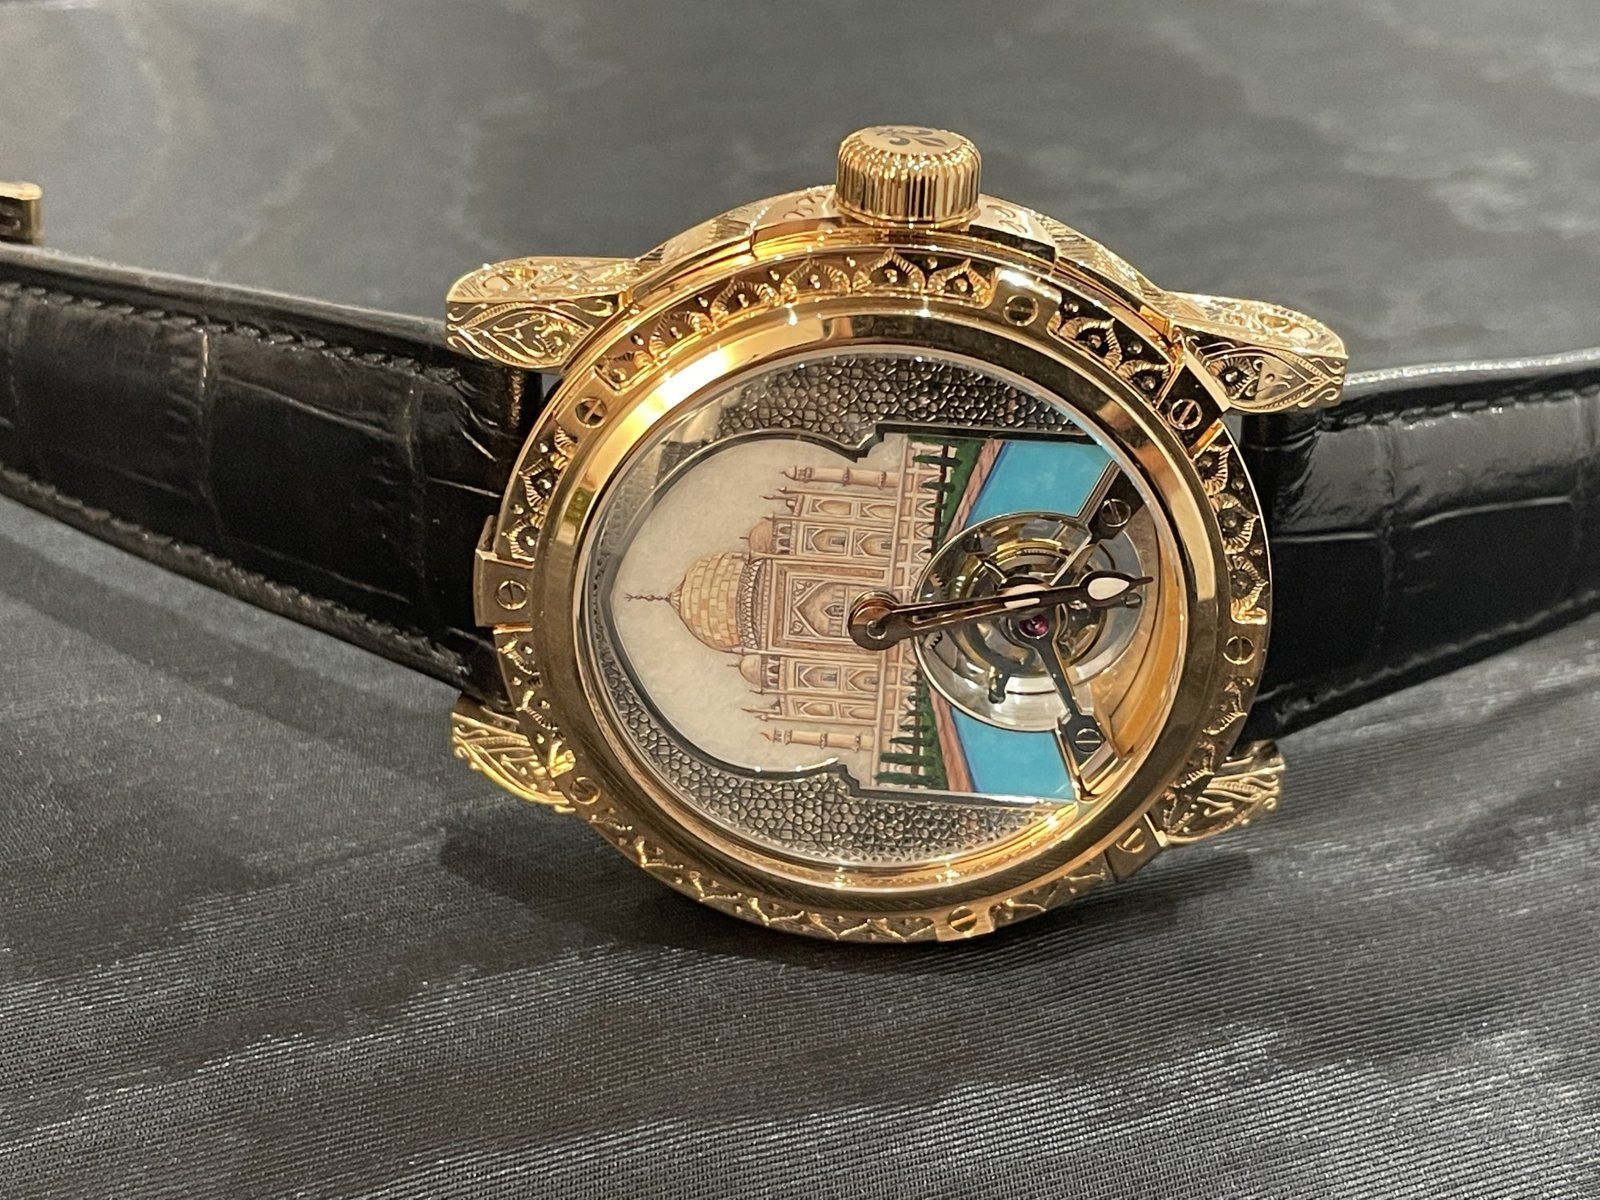 Louis Moinet - Watches and Wonders 2022